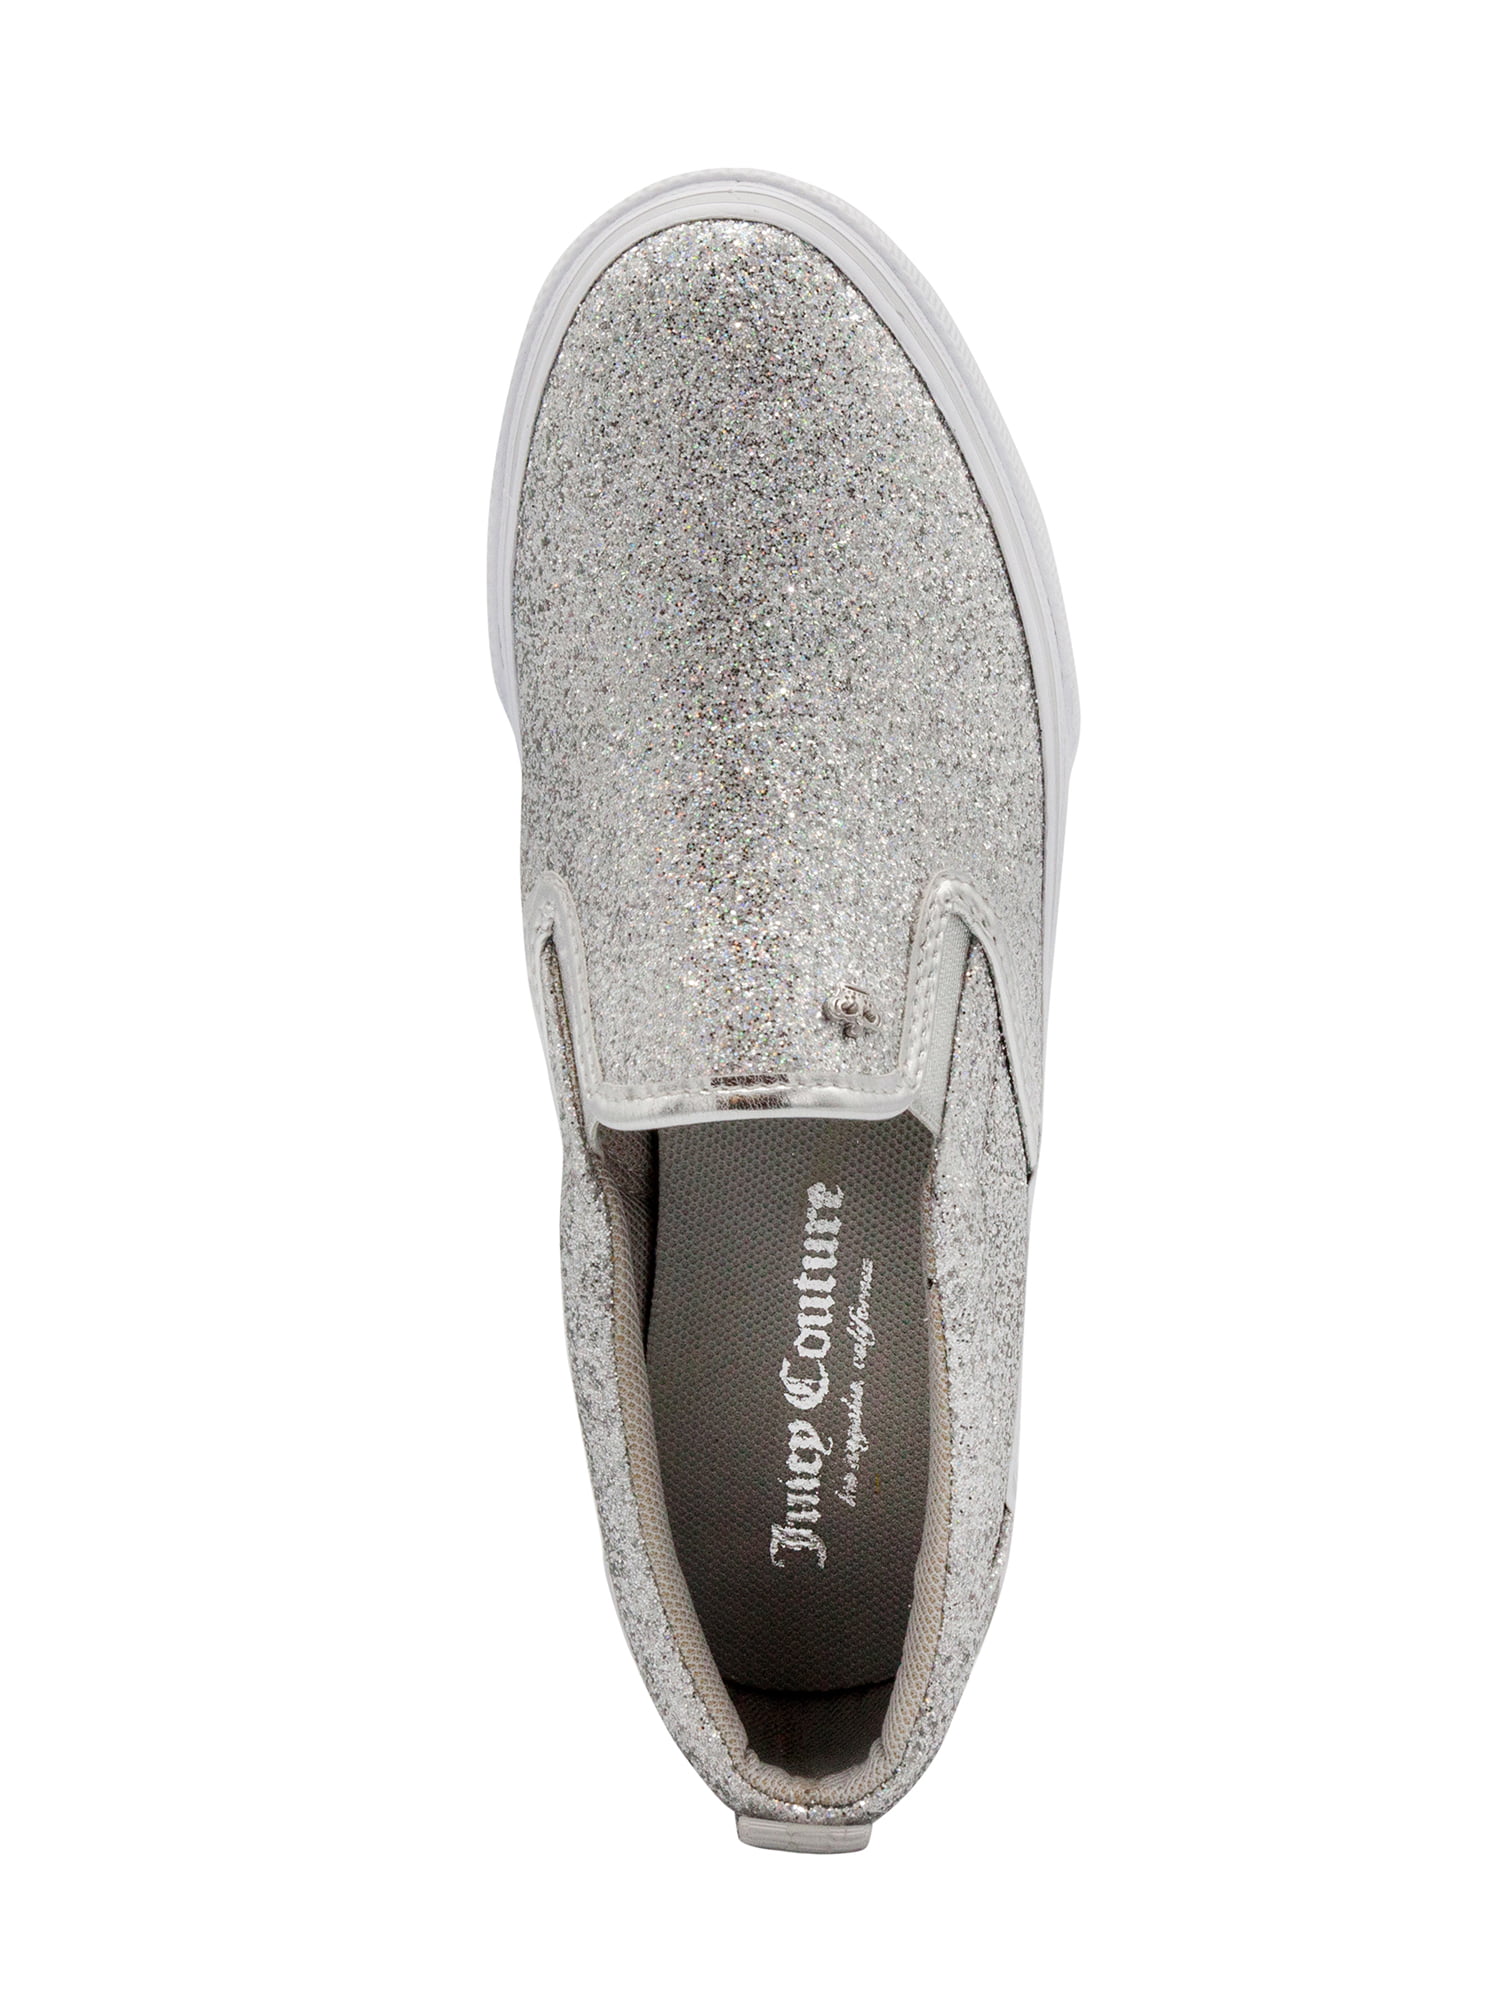 Chanel Shoe Silver Slide Light Catching Paillette Sequins 39.5/ 9.5 Ne –  Mightychic